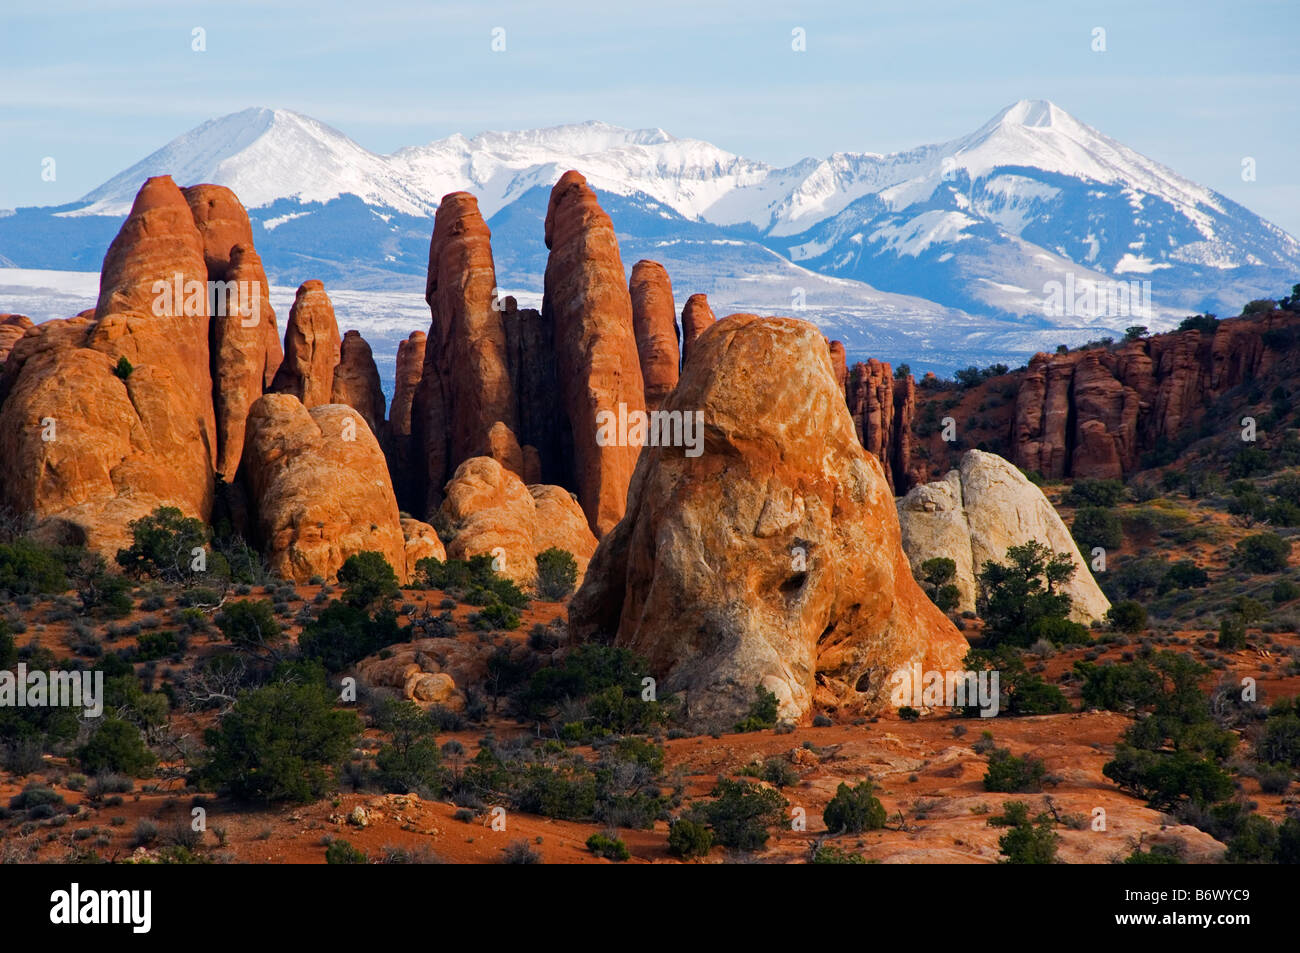 USA, Utah, Arches National Park. Manti La Sal National Forest mountains and sandstone pinnacles at the Devils Garden Stock Photo